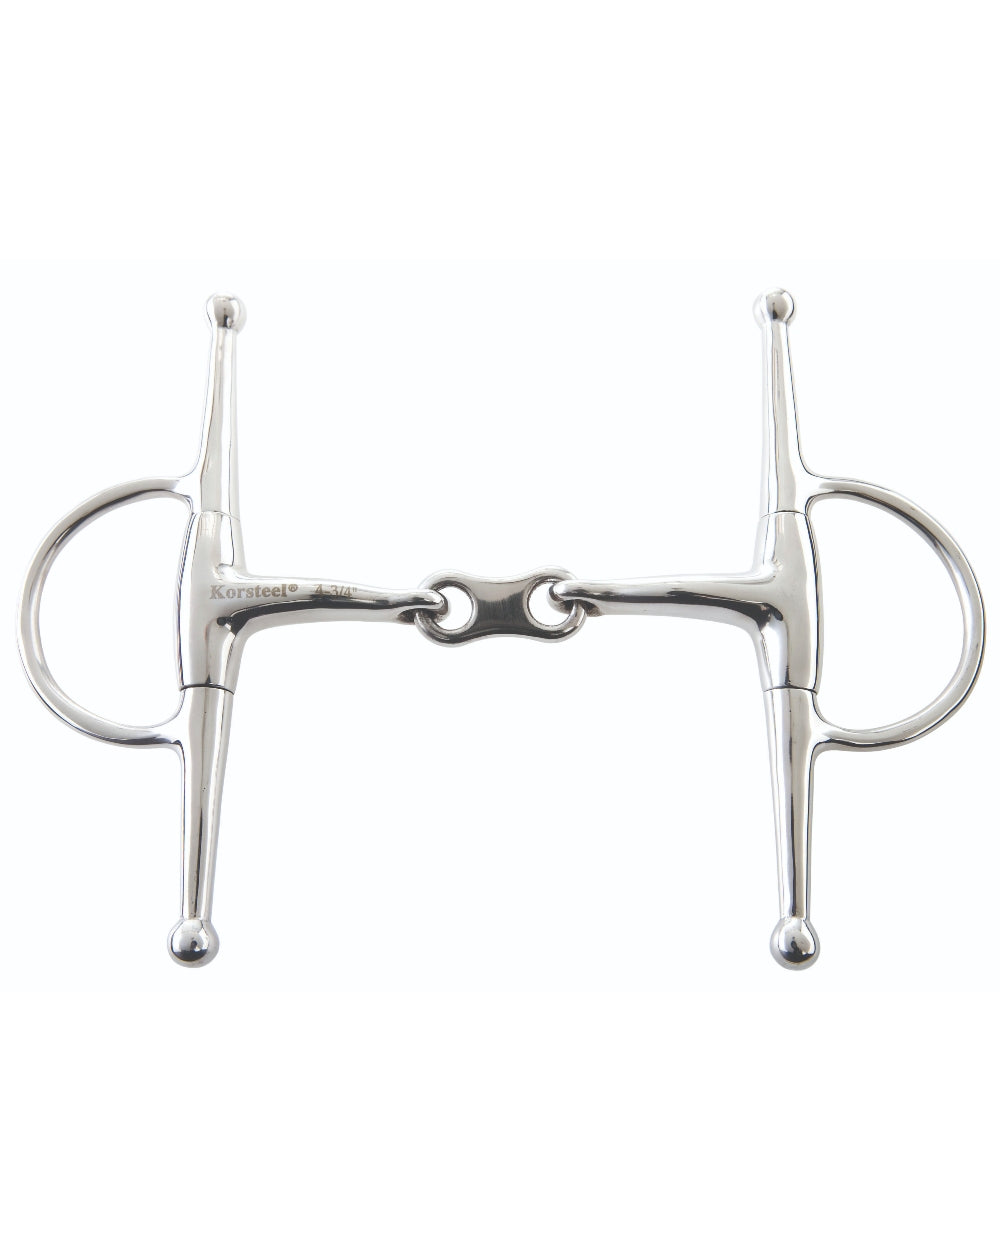 One colour coloured Korsteel Stainless Steel French Link Full Cheek Snaffle Bit on white background